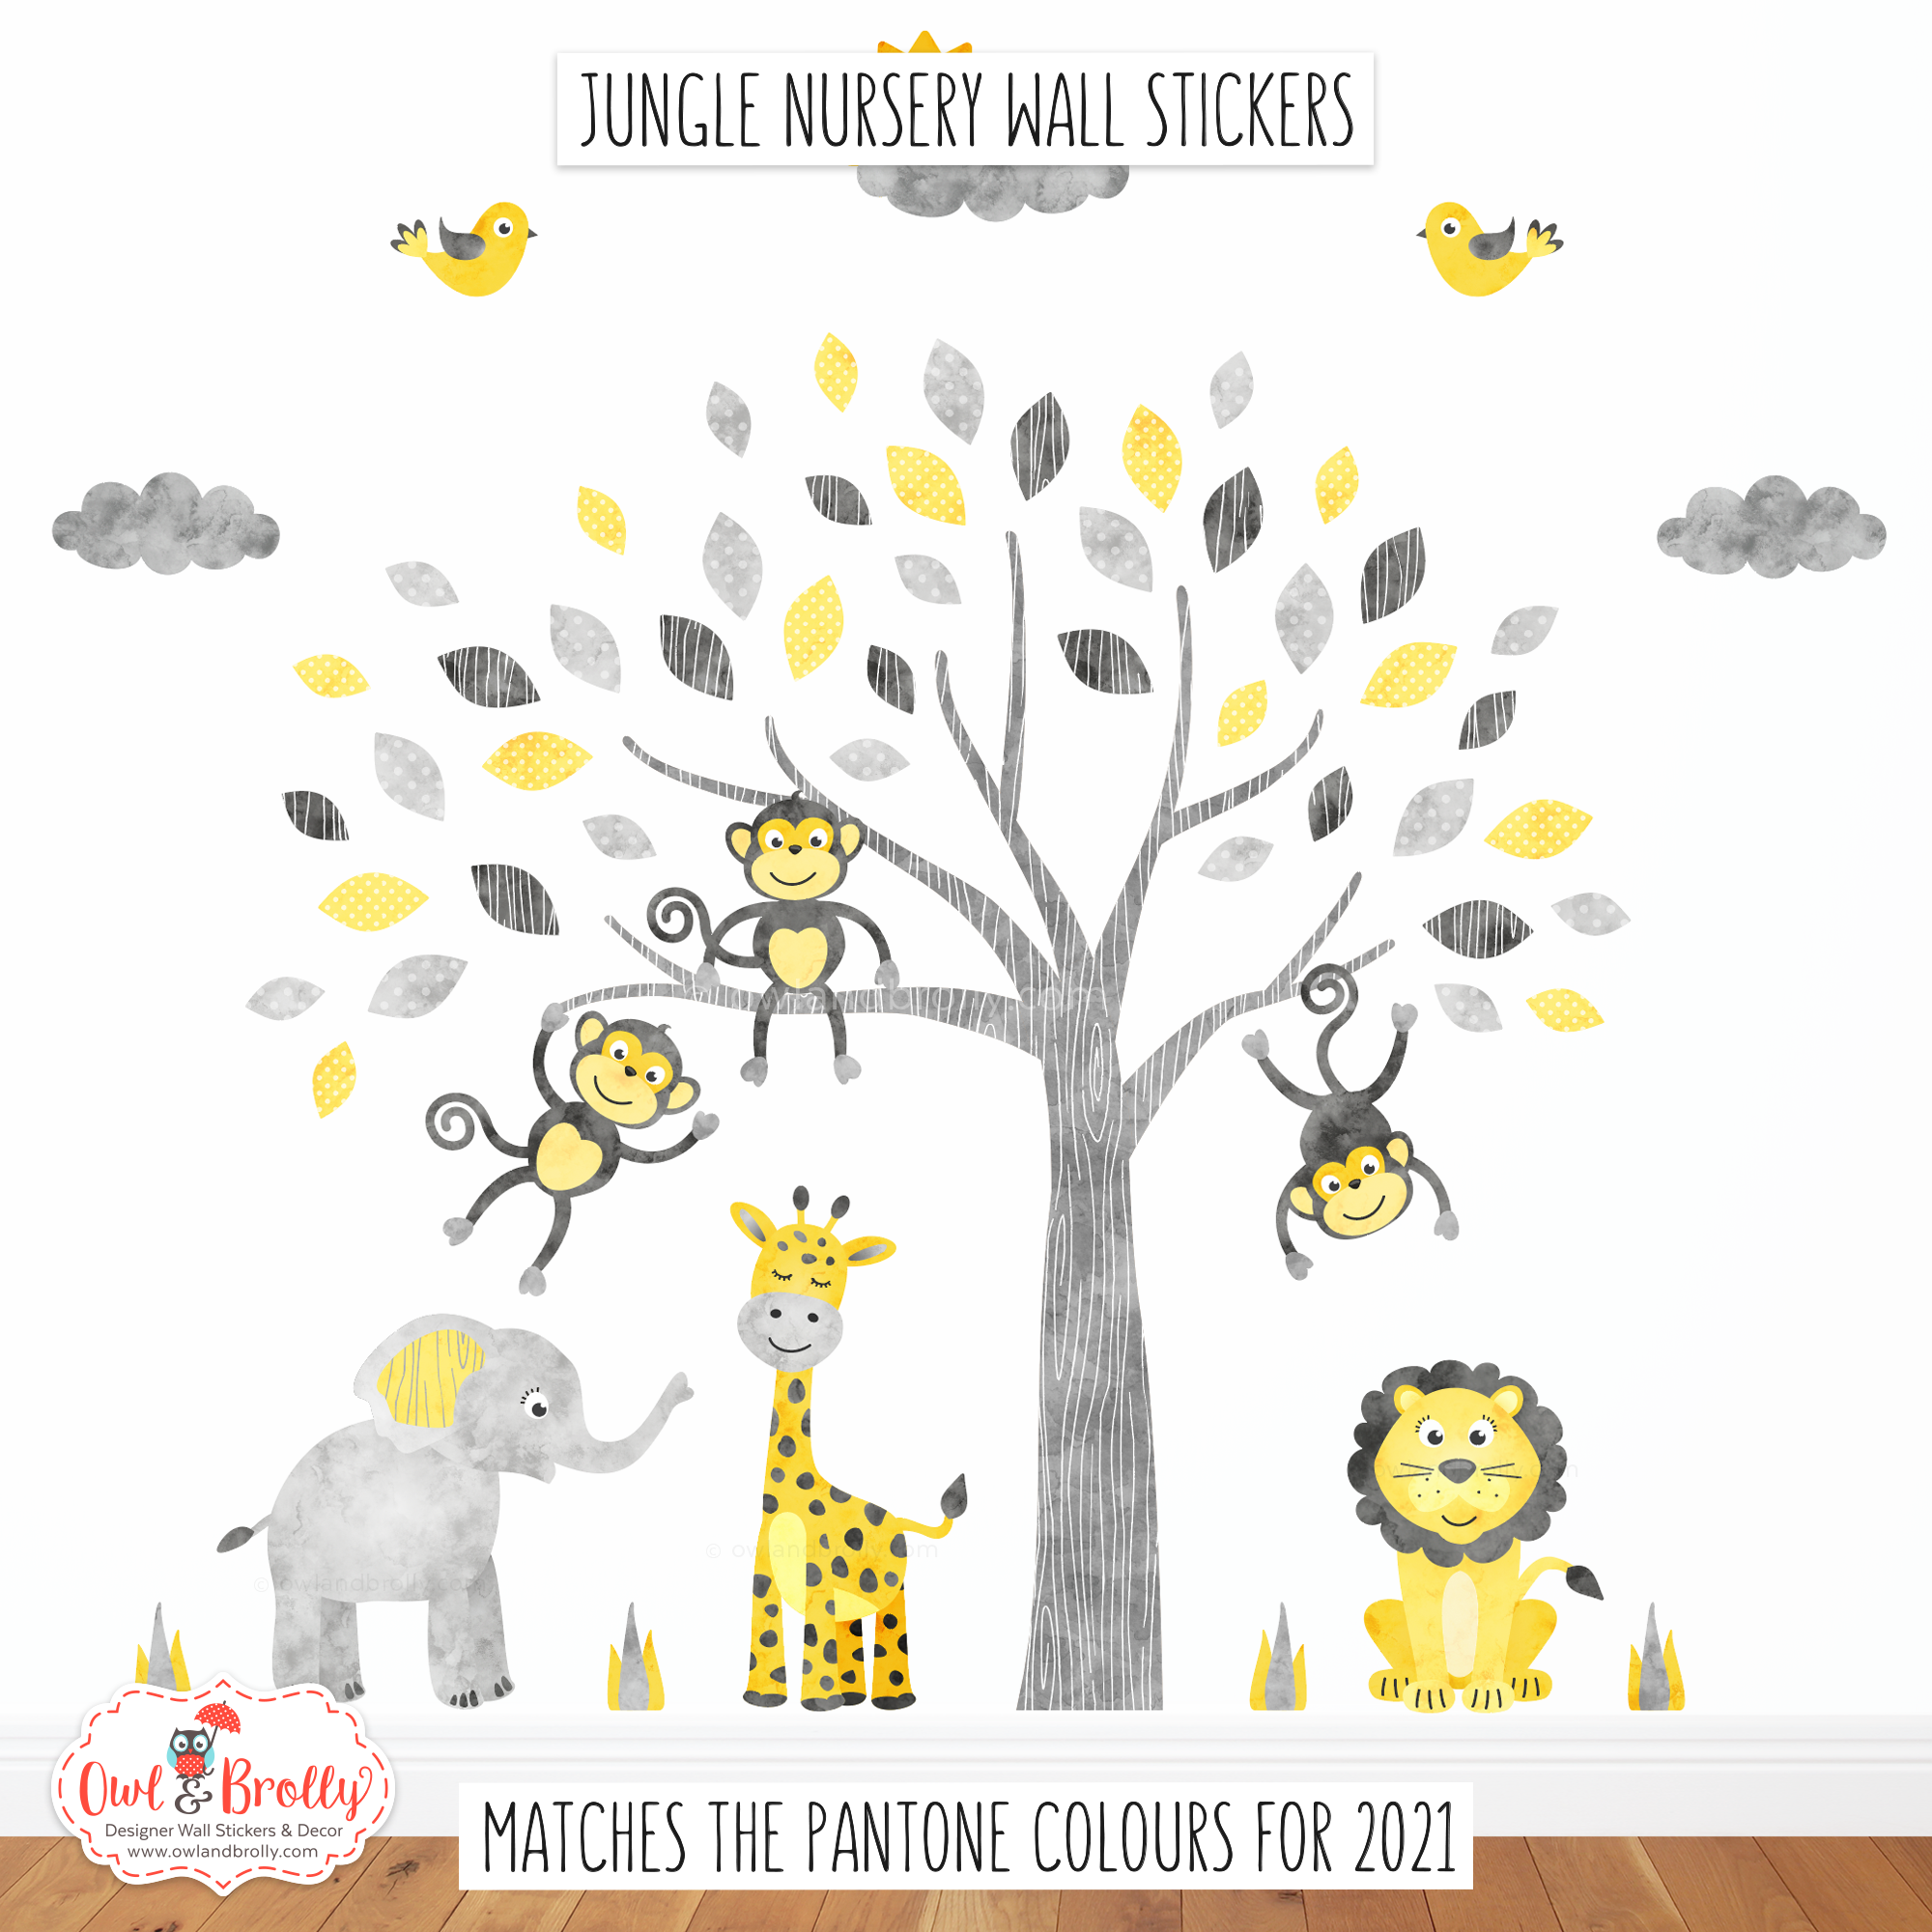 Pantone colour of the year 2021 matching jungle nursery wall sticker decals